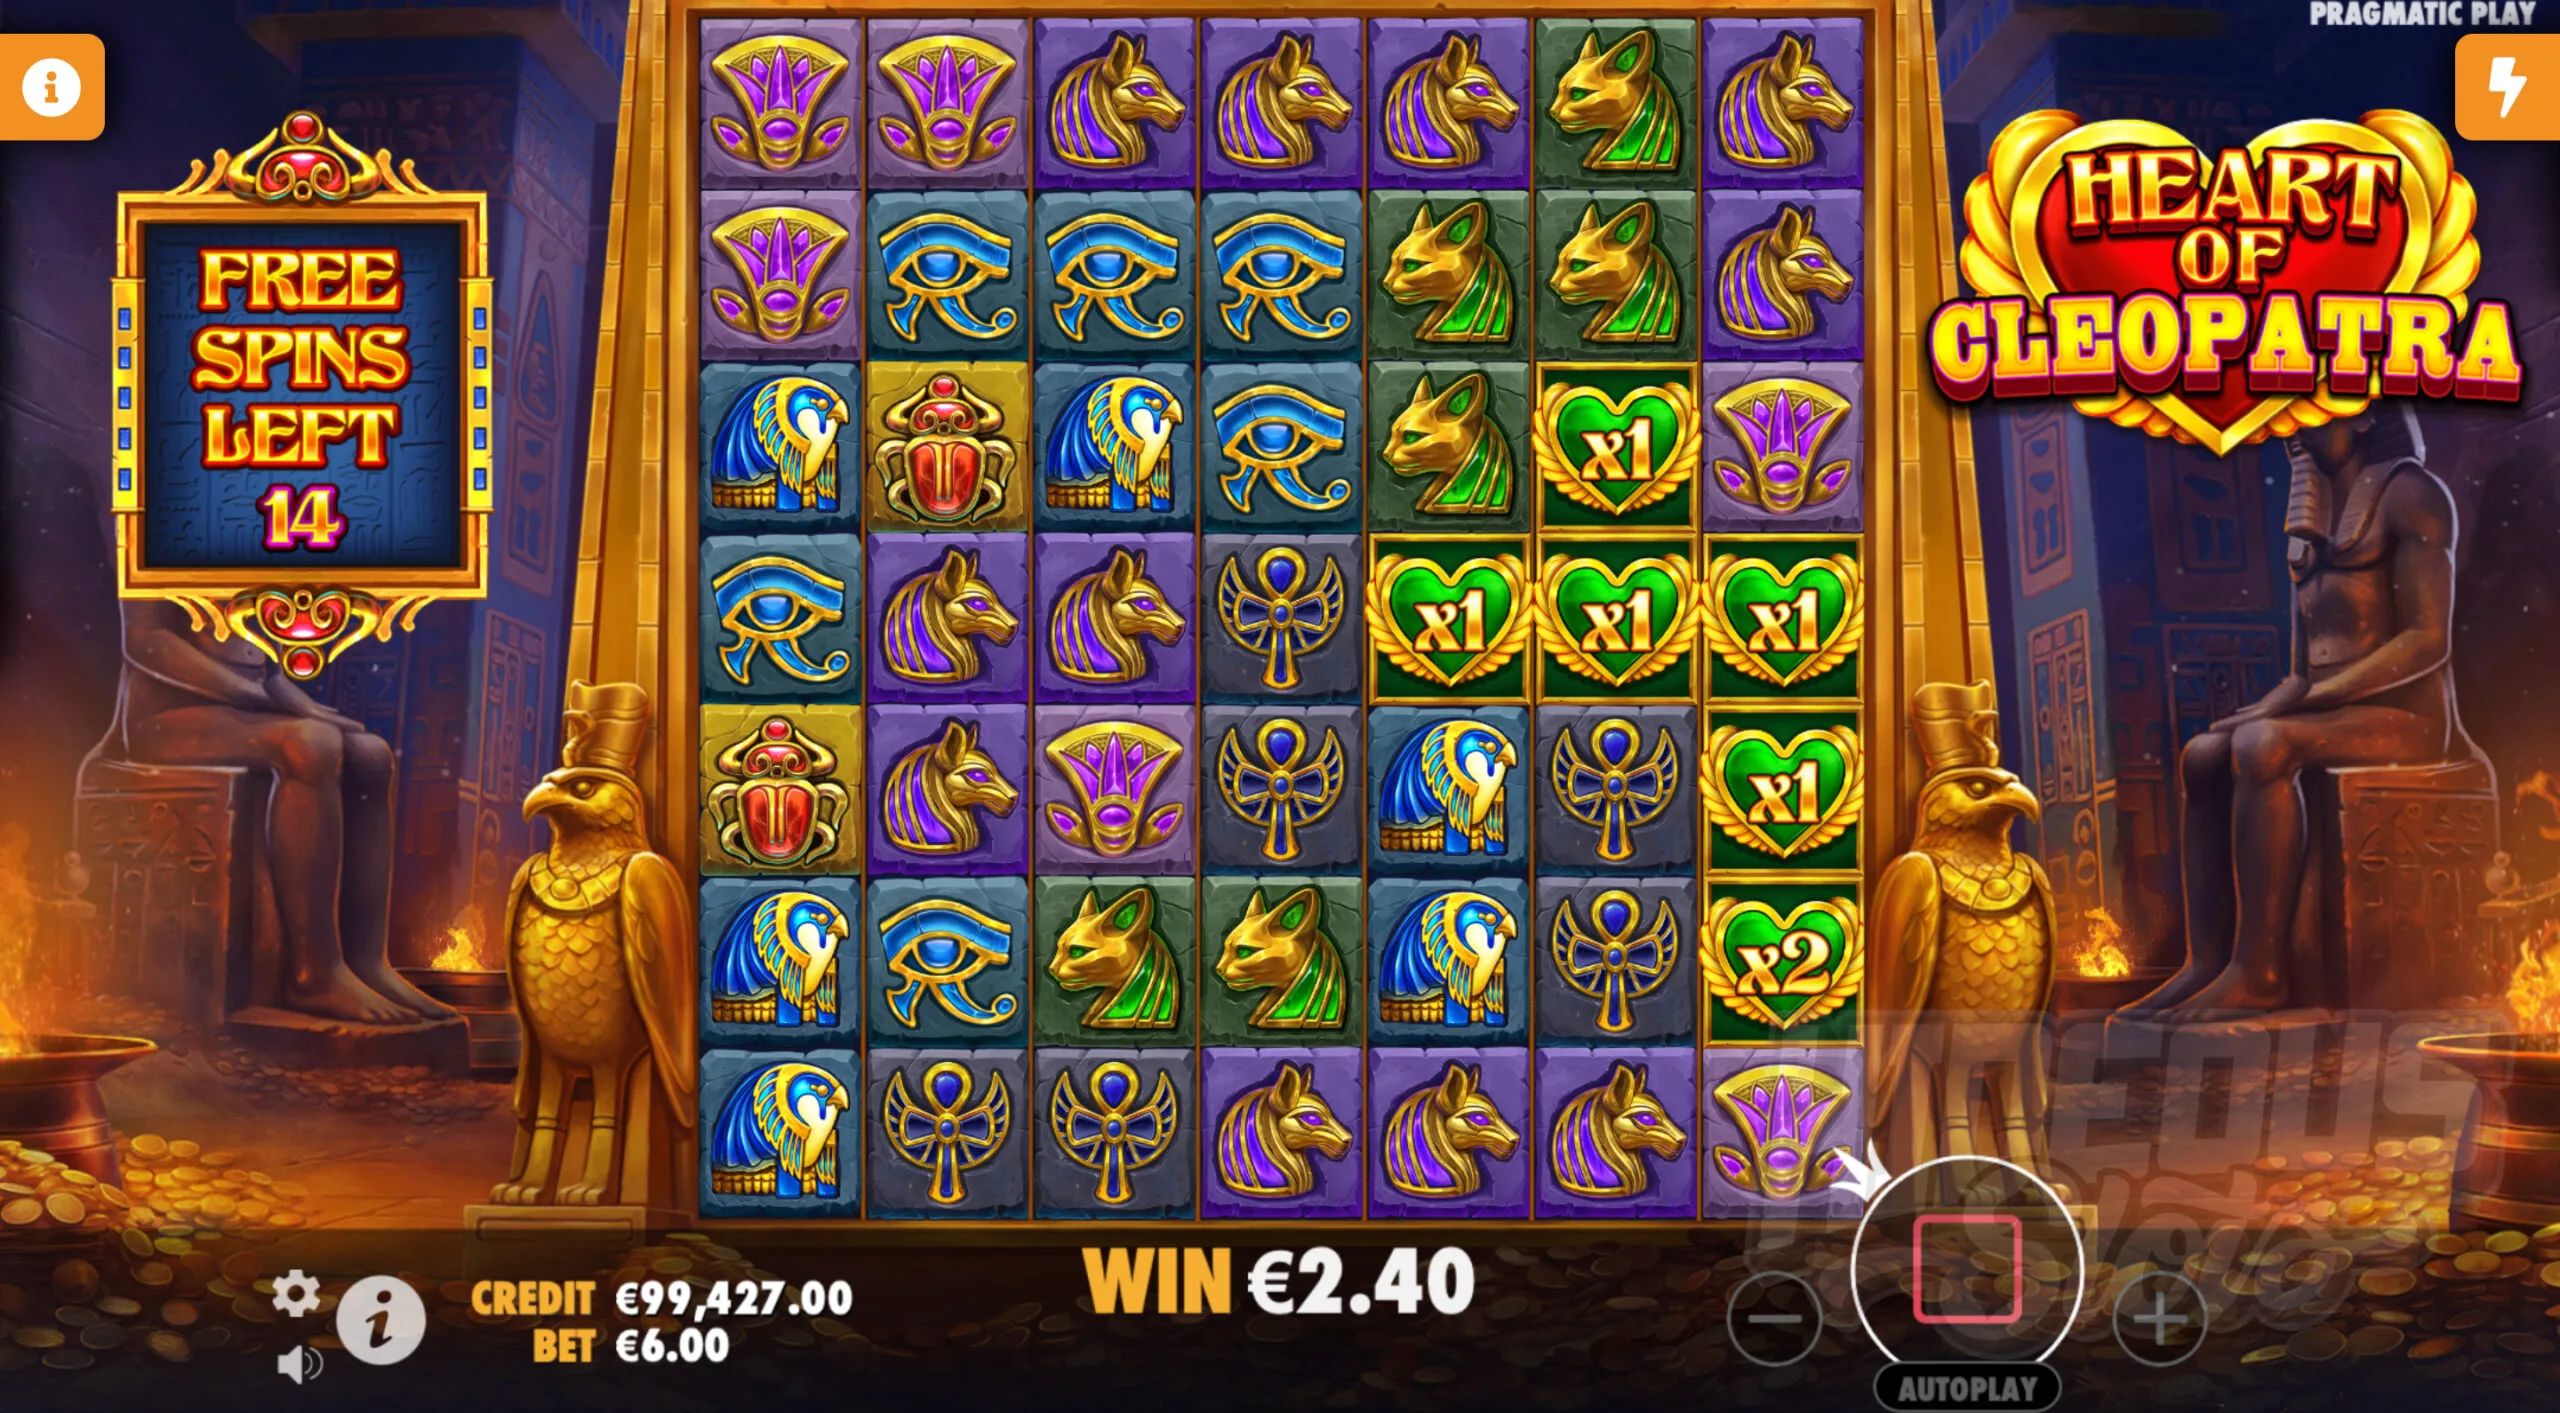 During Free Spins Money Spots and Multipliers are Sticky for the Duration of Spins